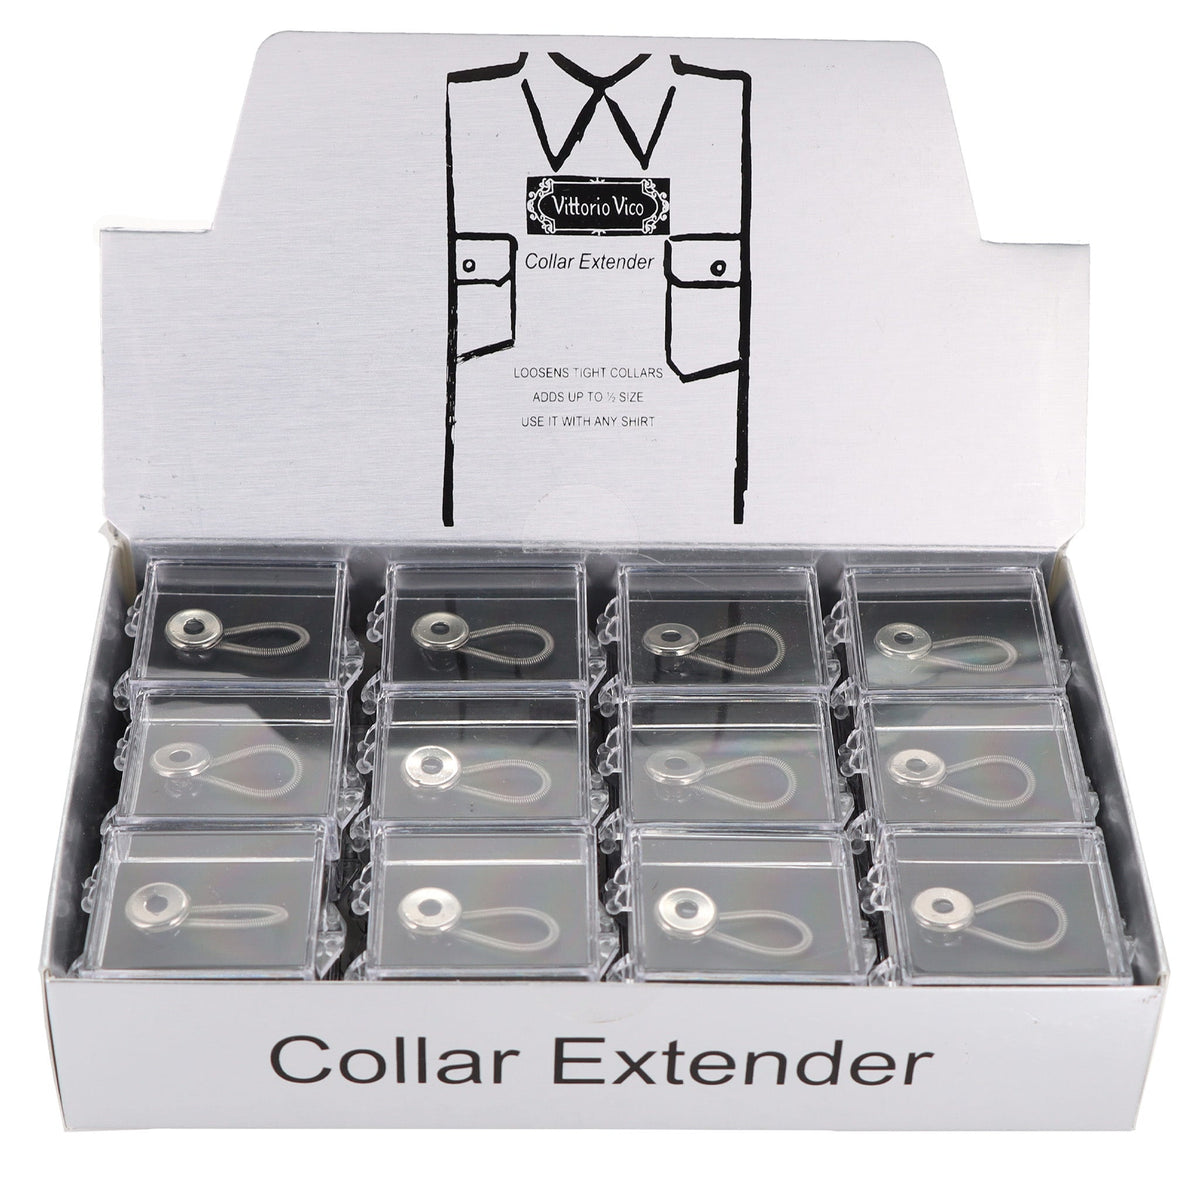 Vittorio Farina &quot;WONDER&quot; Button-Collar Extenders (Wholesale) by Classy Cufflinks - Button-CollarPk24 - Classy Cufflinks